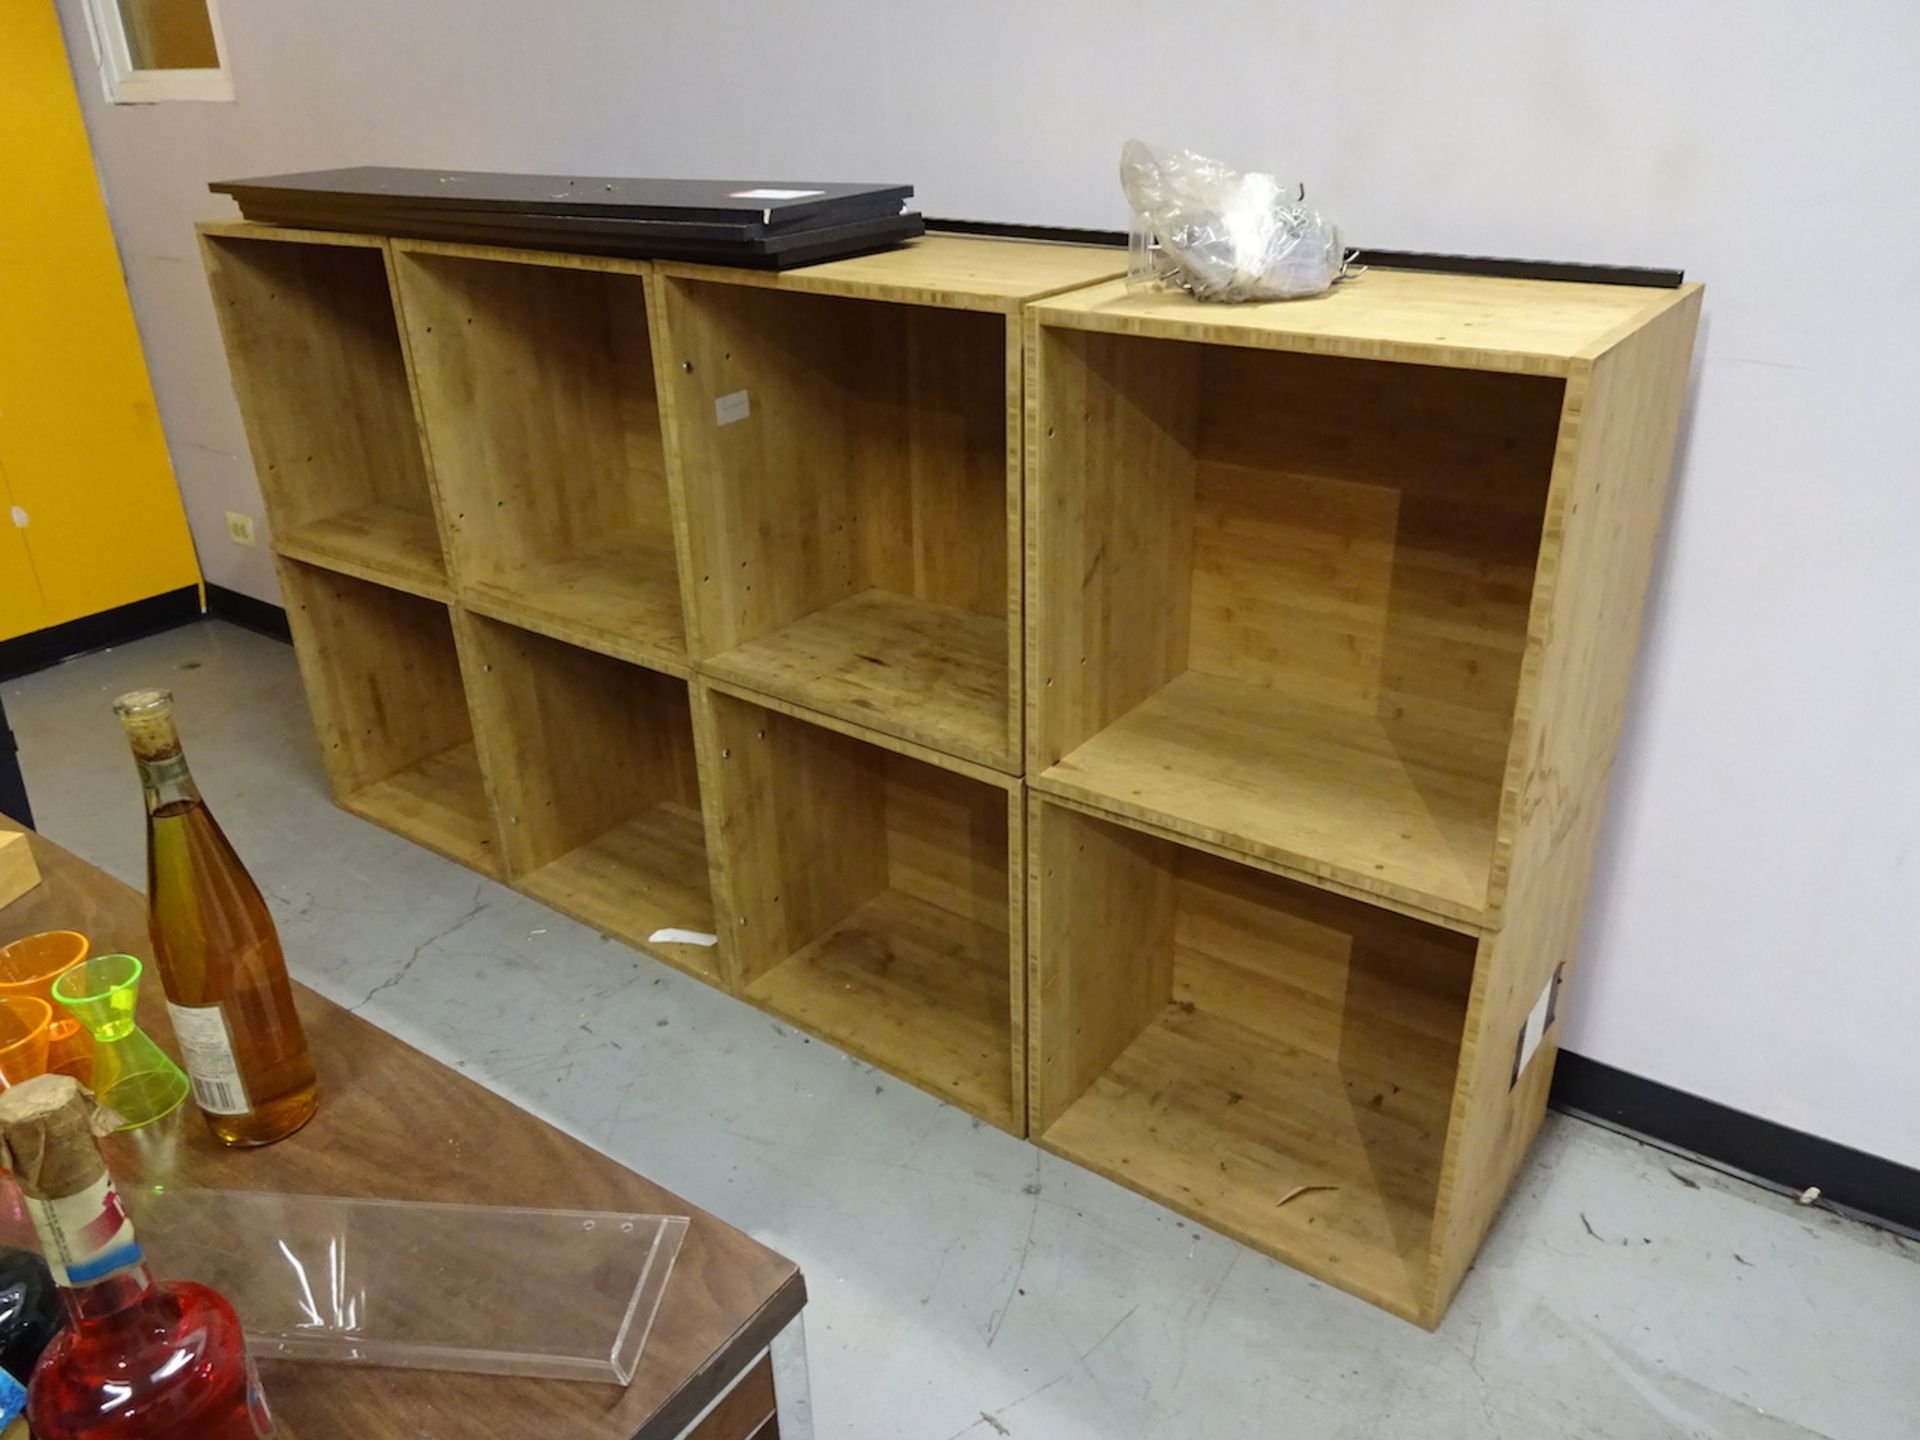 Lot: Wood Cabinets - Image 2 of 2